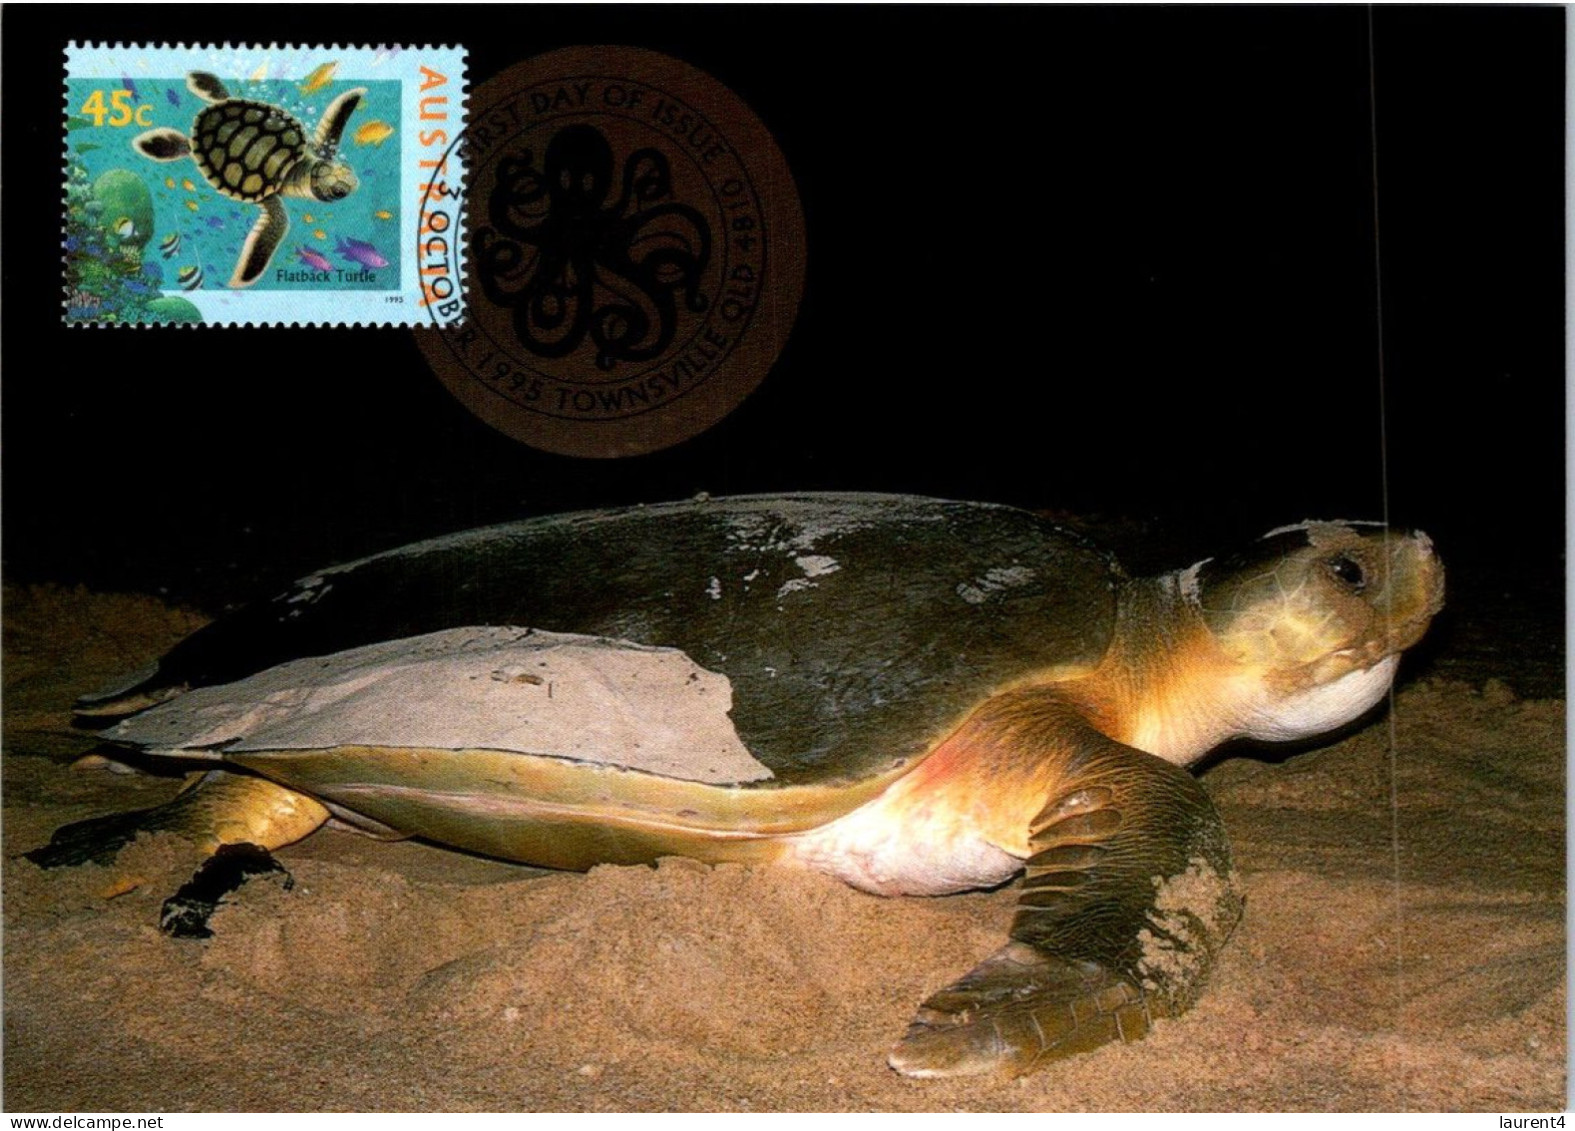 20-5-2024 (5 Z 39) Australia (6 Maxicard) Fish - Shark - Turtle Etc (if Not Sold Will NOT Be Re-listed) - Cartes-Maximum (CM)